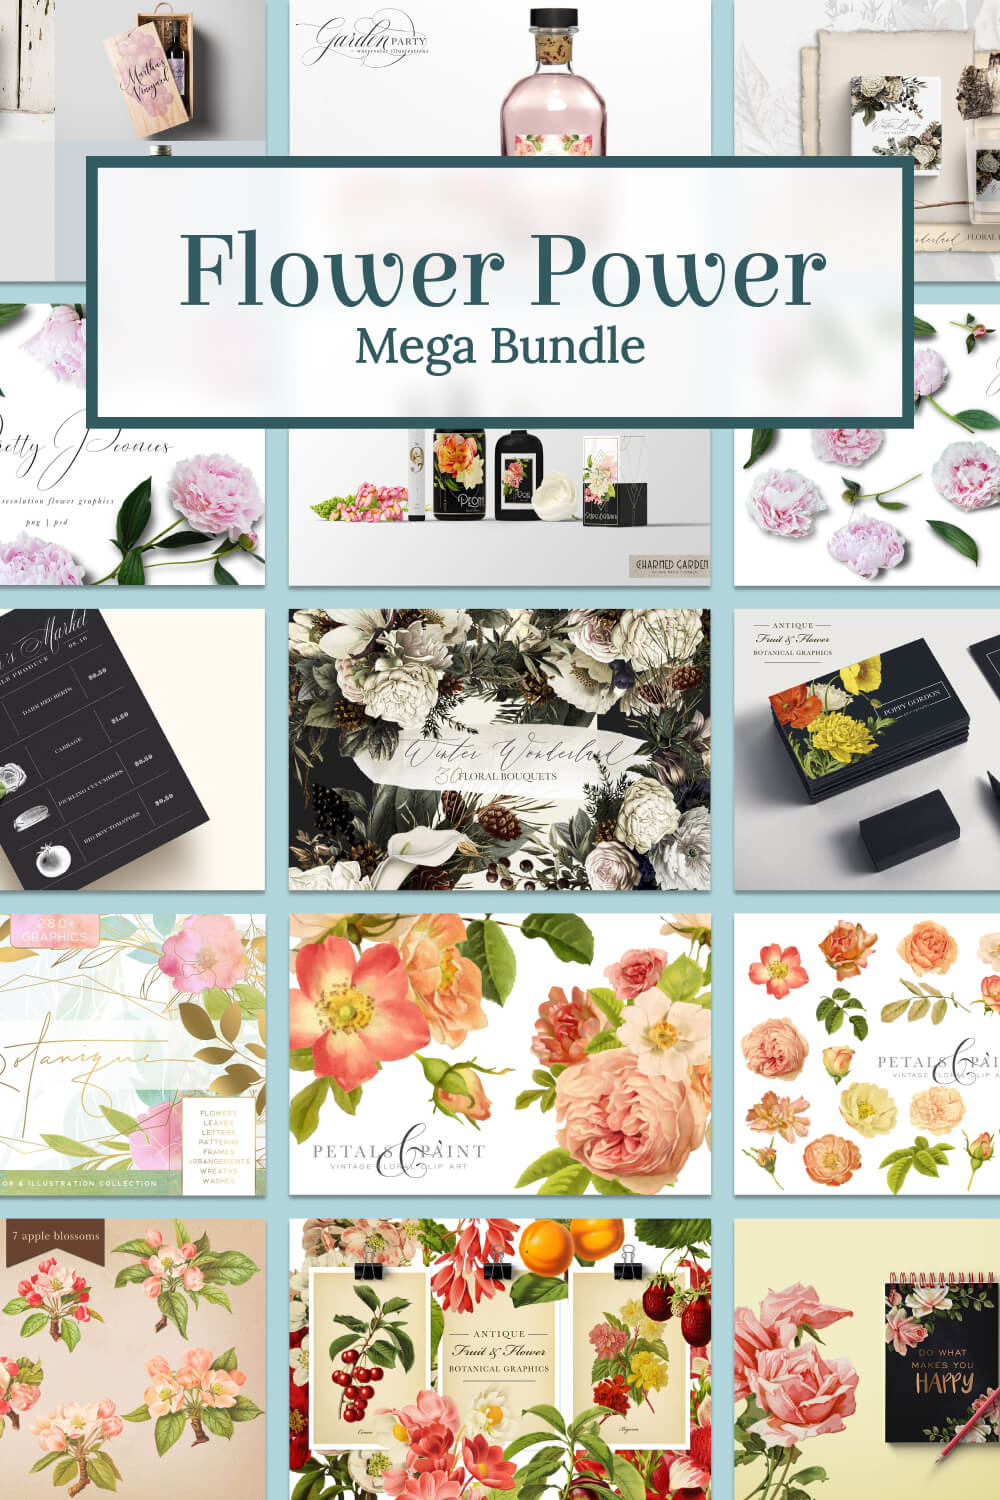 Many cards are vertically arranged on the theme of flower power.